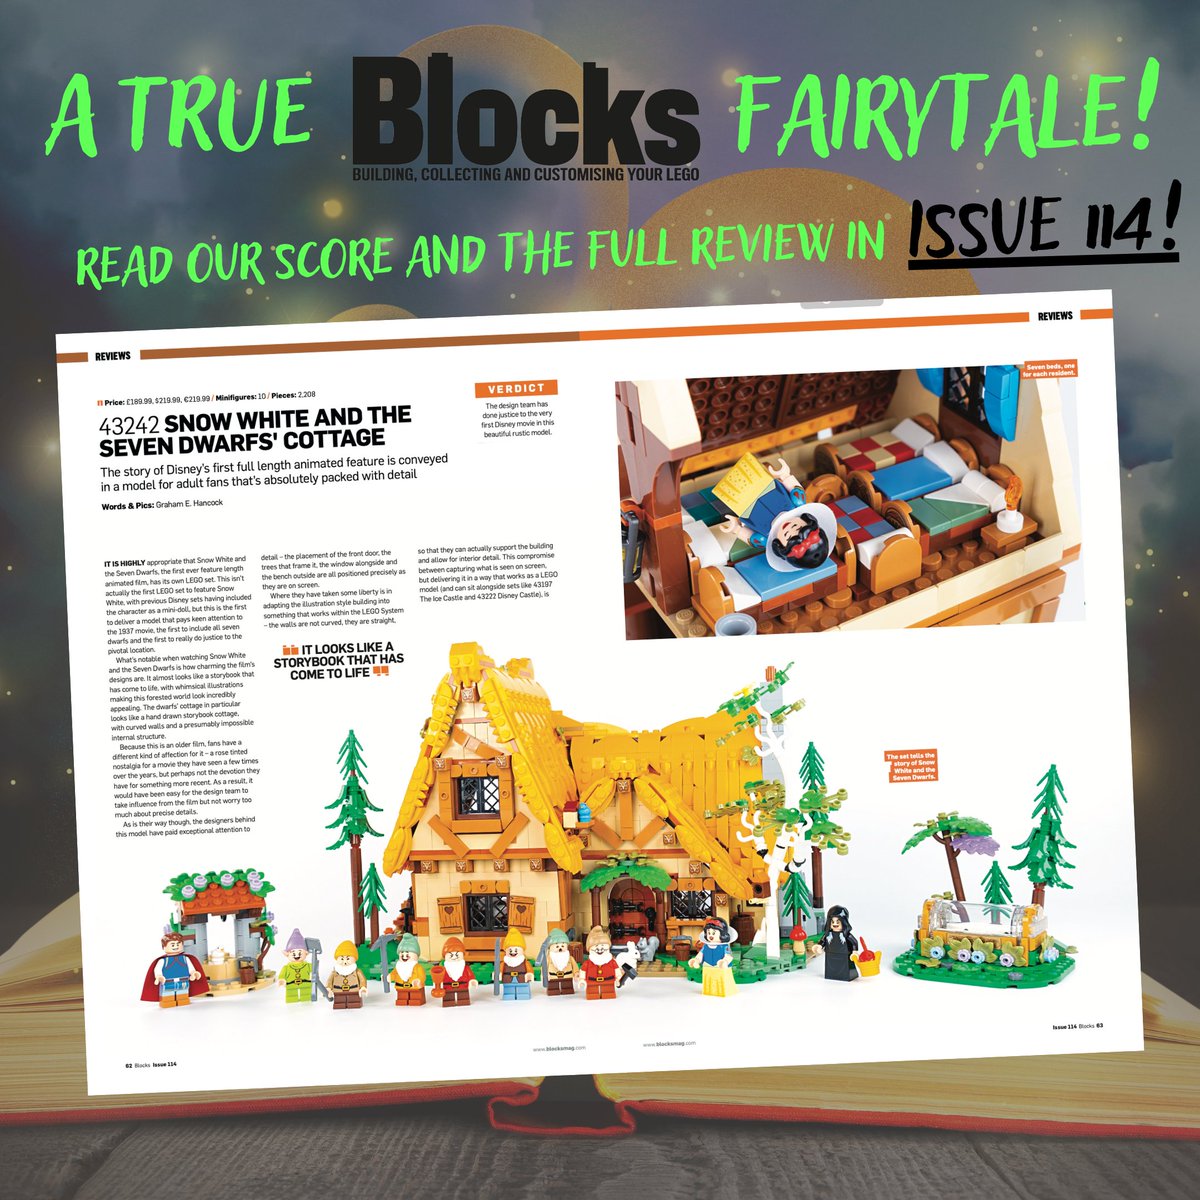 43242 Snow White and the Seven Dwarfs' Cottage is a dream come true - but just how good IS it? Find out what score we gave it and read EVERY in-depth review in Issue 114 - available now at BlocksMag.com! #LEGO #Disney #LEGOReview